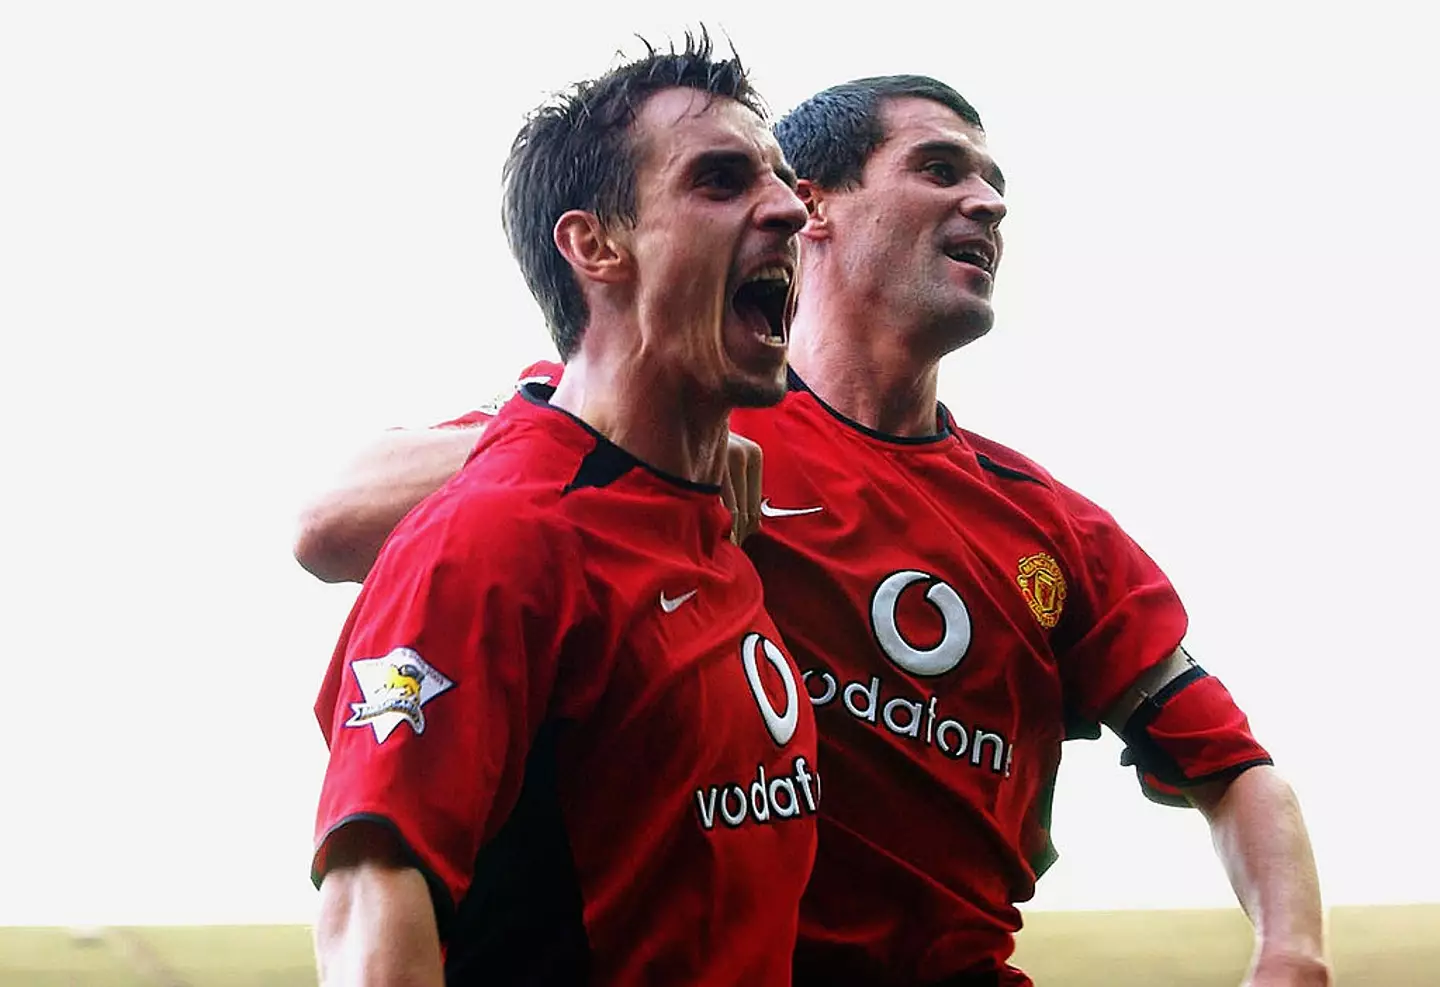 Gary Neville and Roy Keane celebrate a Manchester United goal (